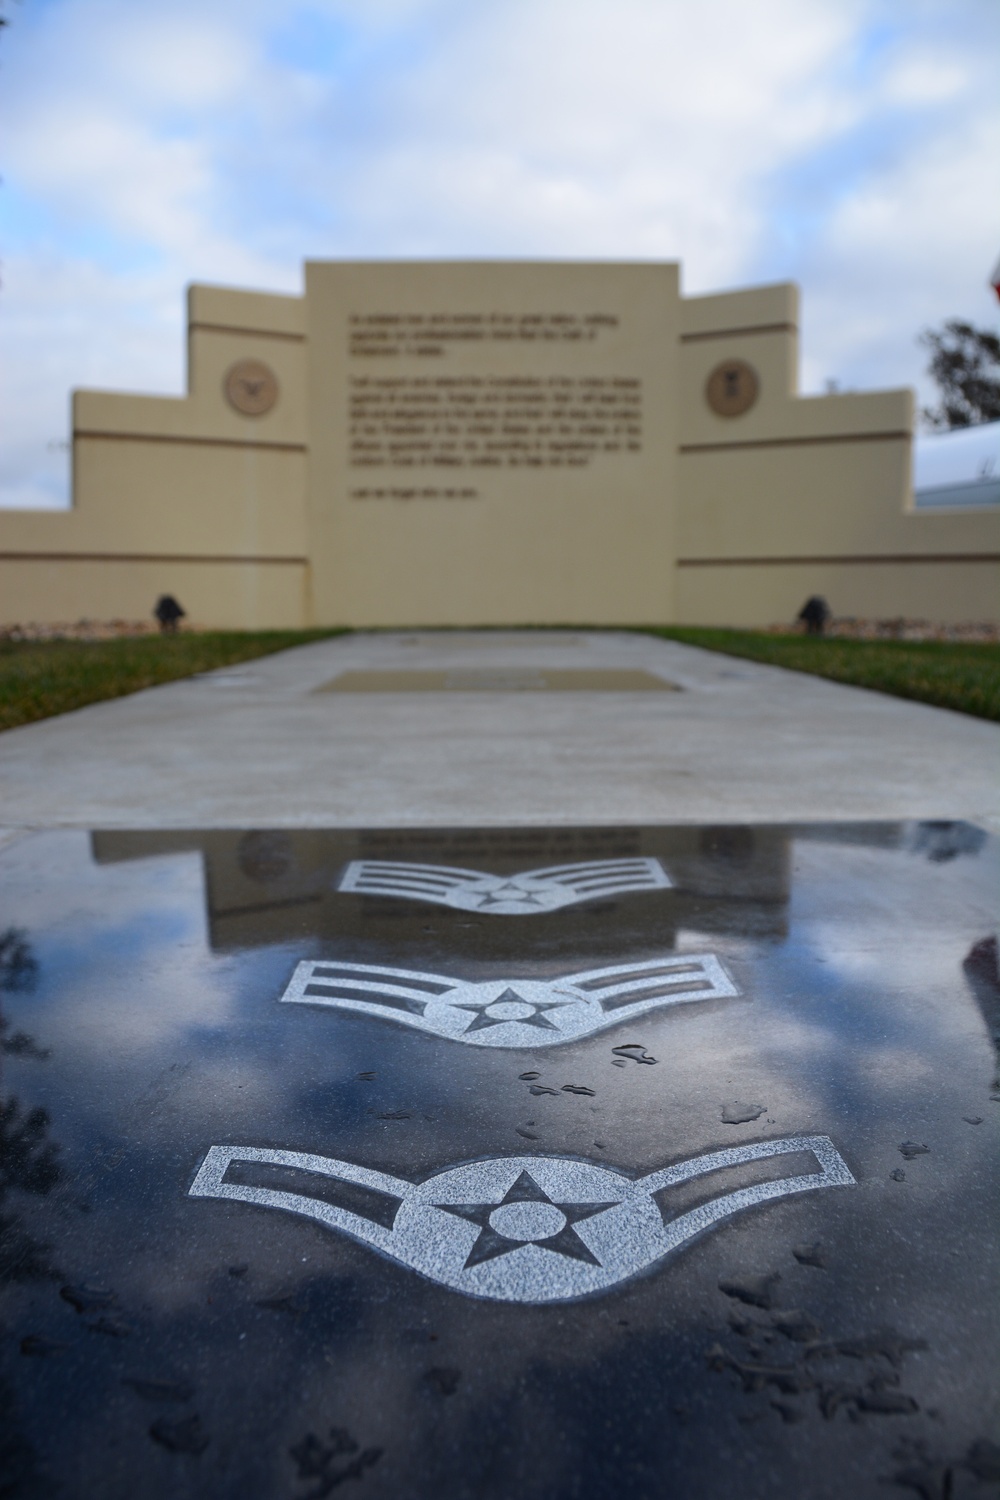 Travis Enlisted Oath Wall Remains important monument